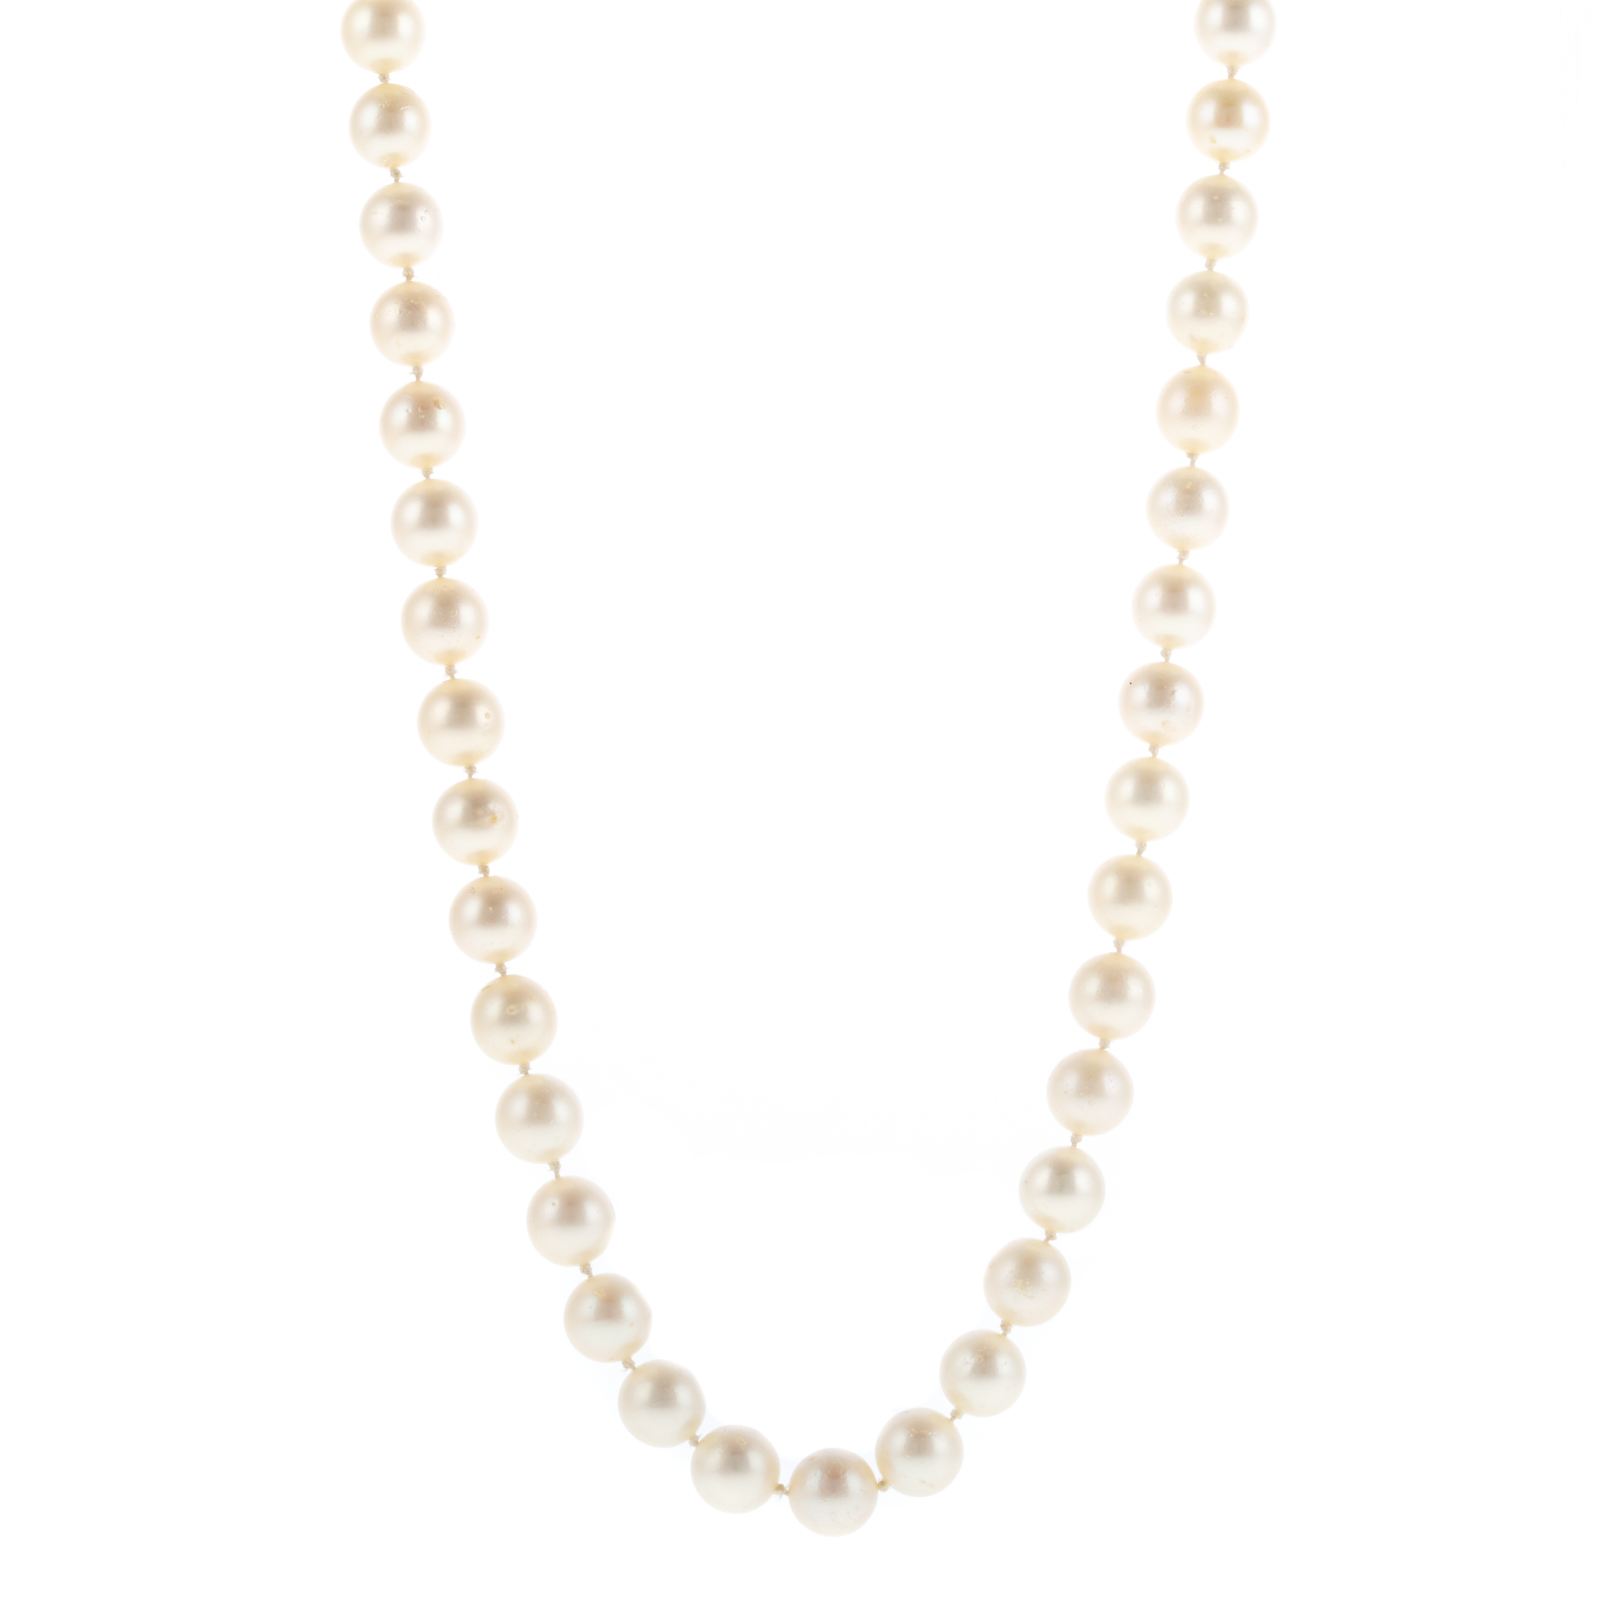 A STRAND OF CULTURED PEARLS WITH 3cb54e